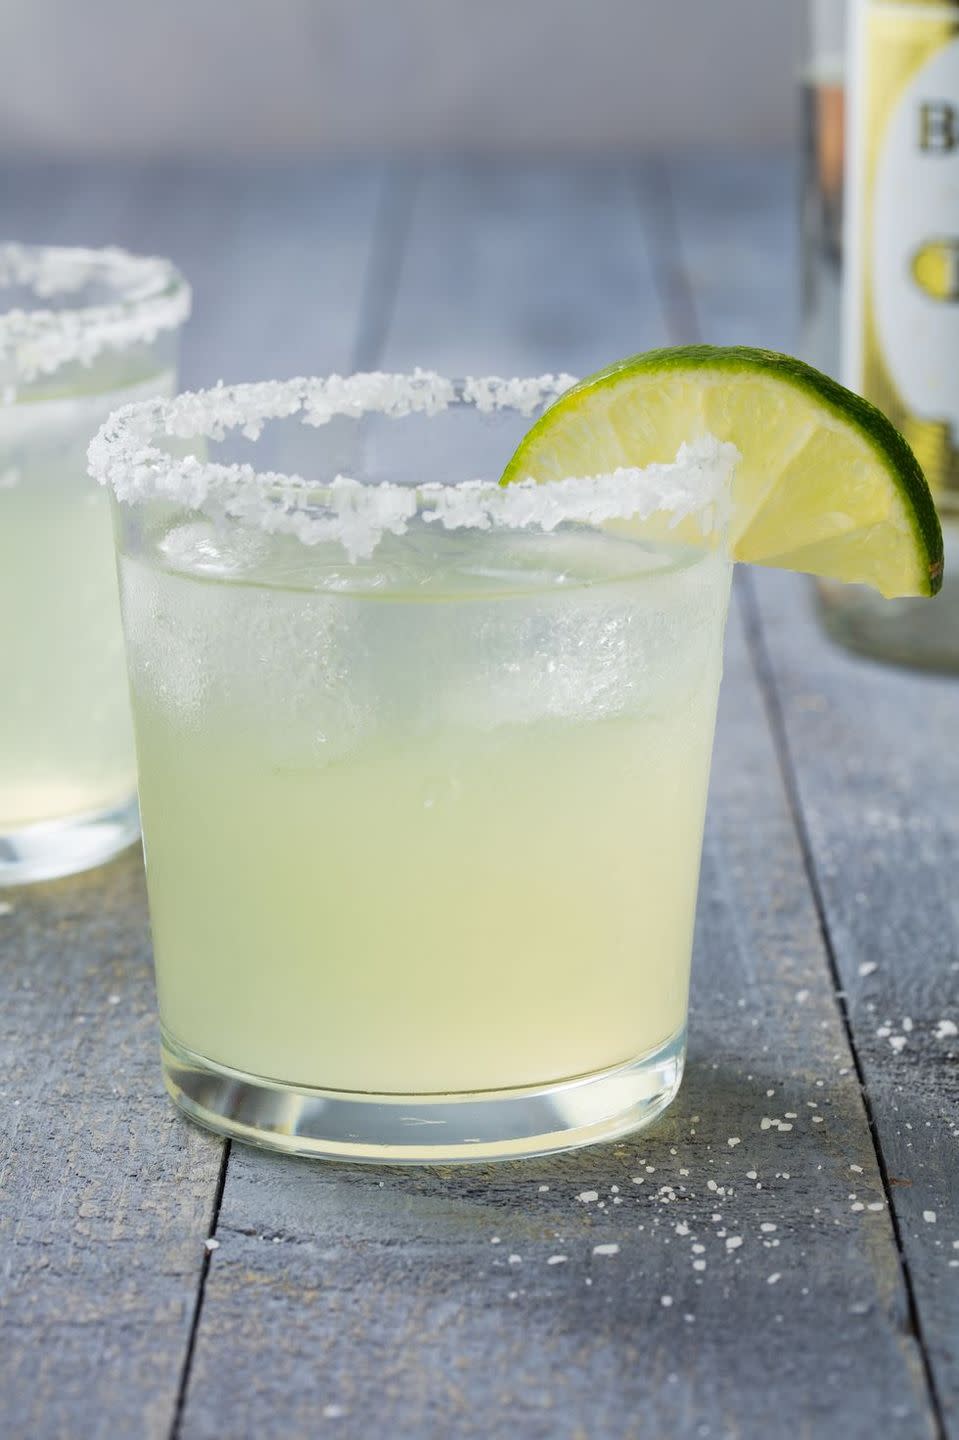 <p>The margarita, now one of the most popular cocktails in the world, is thought to have started out as the variation on another Prohibition-era drink called the "Daisy." Spanish for "daisy," the marg swapped in tequila for the requisite brandy and lime juice for lemon juice, and a classic was born.<br><br>Get the <strong><a href="https://www.delish.com/cooking/recipe-ideas/a20139300/best-classic-margarita-recipe/" rel="nofollow noopener" target="_blank" data-ylk="slk:Classic Margaritas recipe" class="link ">Classic Margaritas recipe</a></strong>.</p>